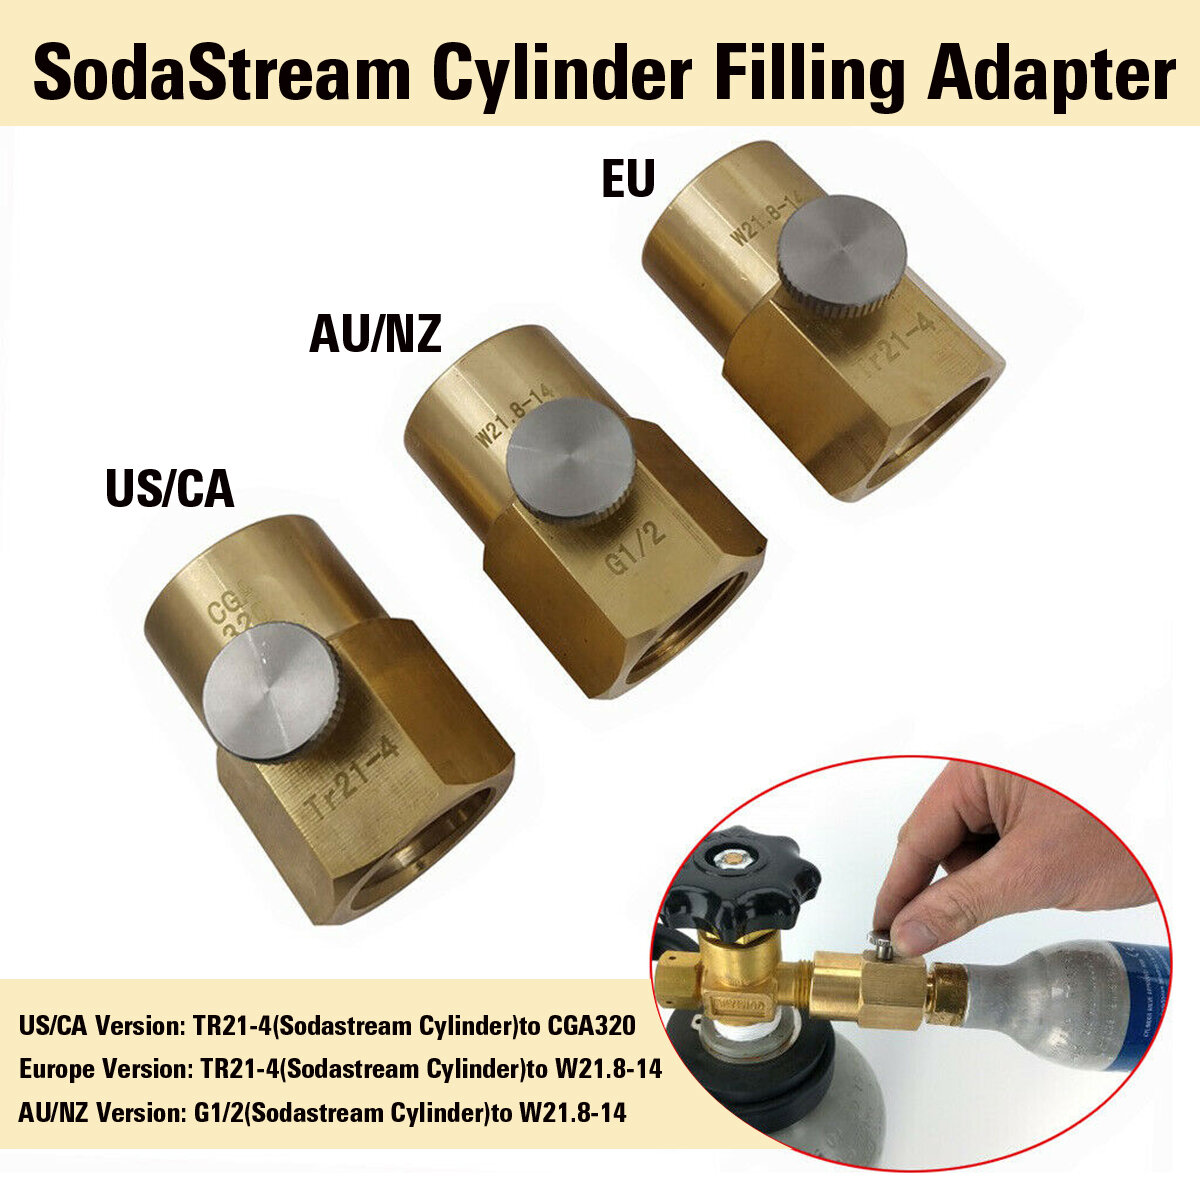 SodaStream Cylinder Refill Adapter + Bleed Valve + W21.8-14 /US CGA320 Connector